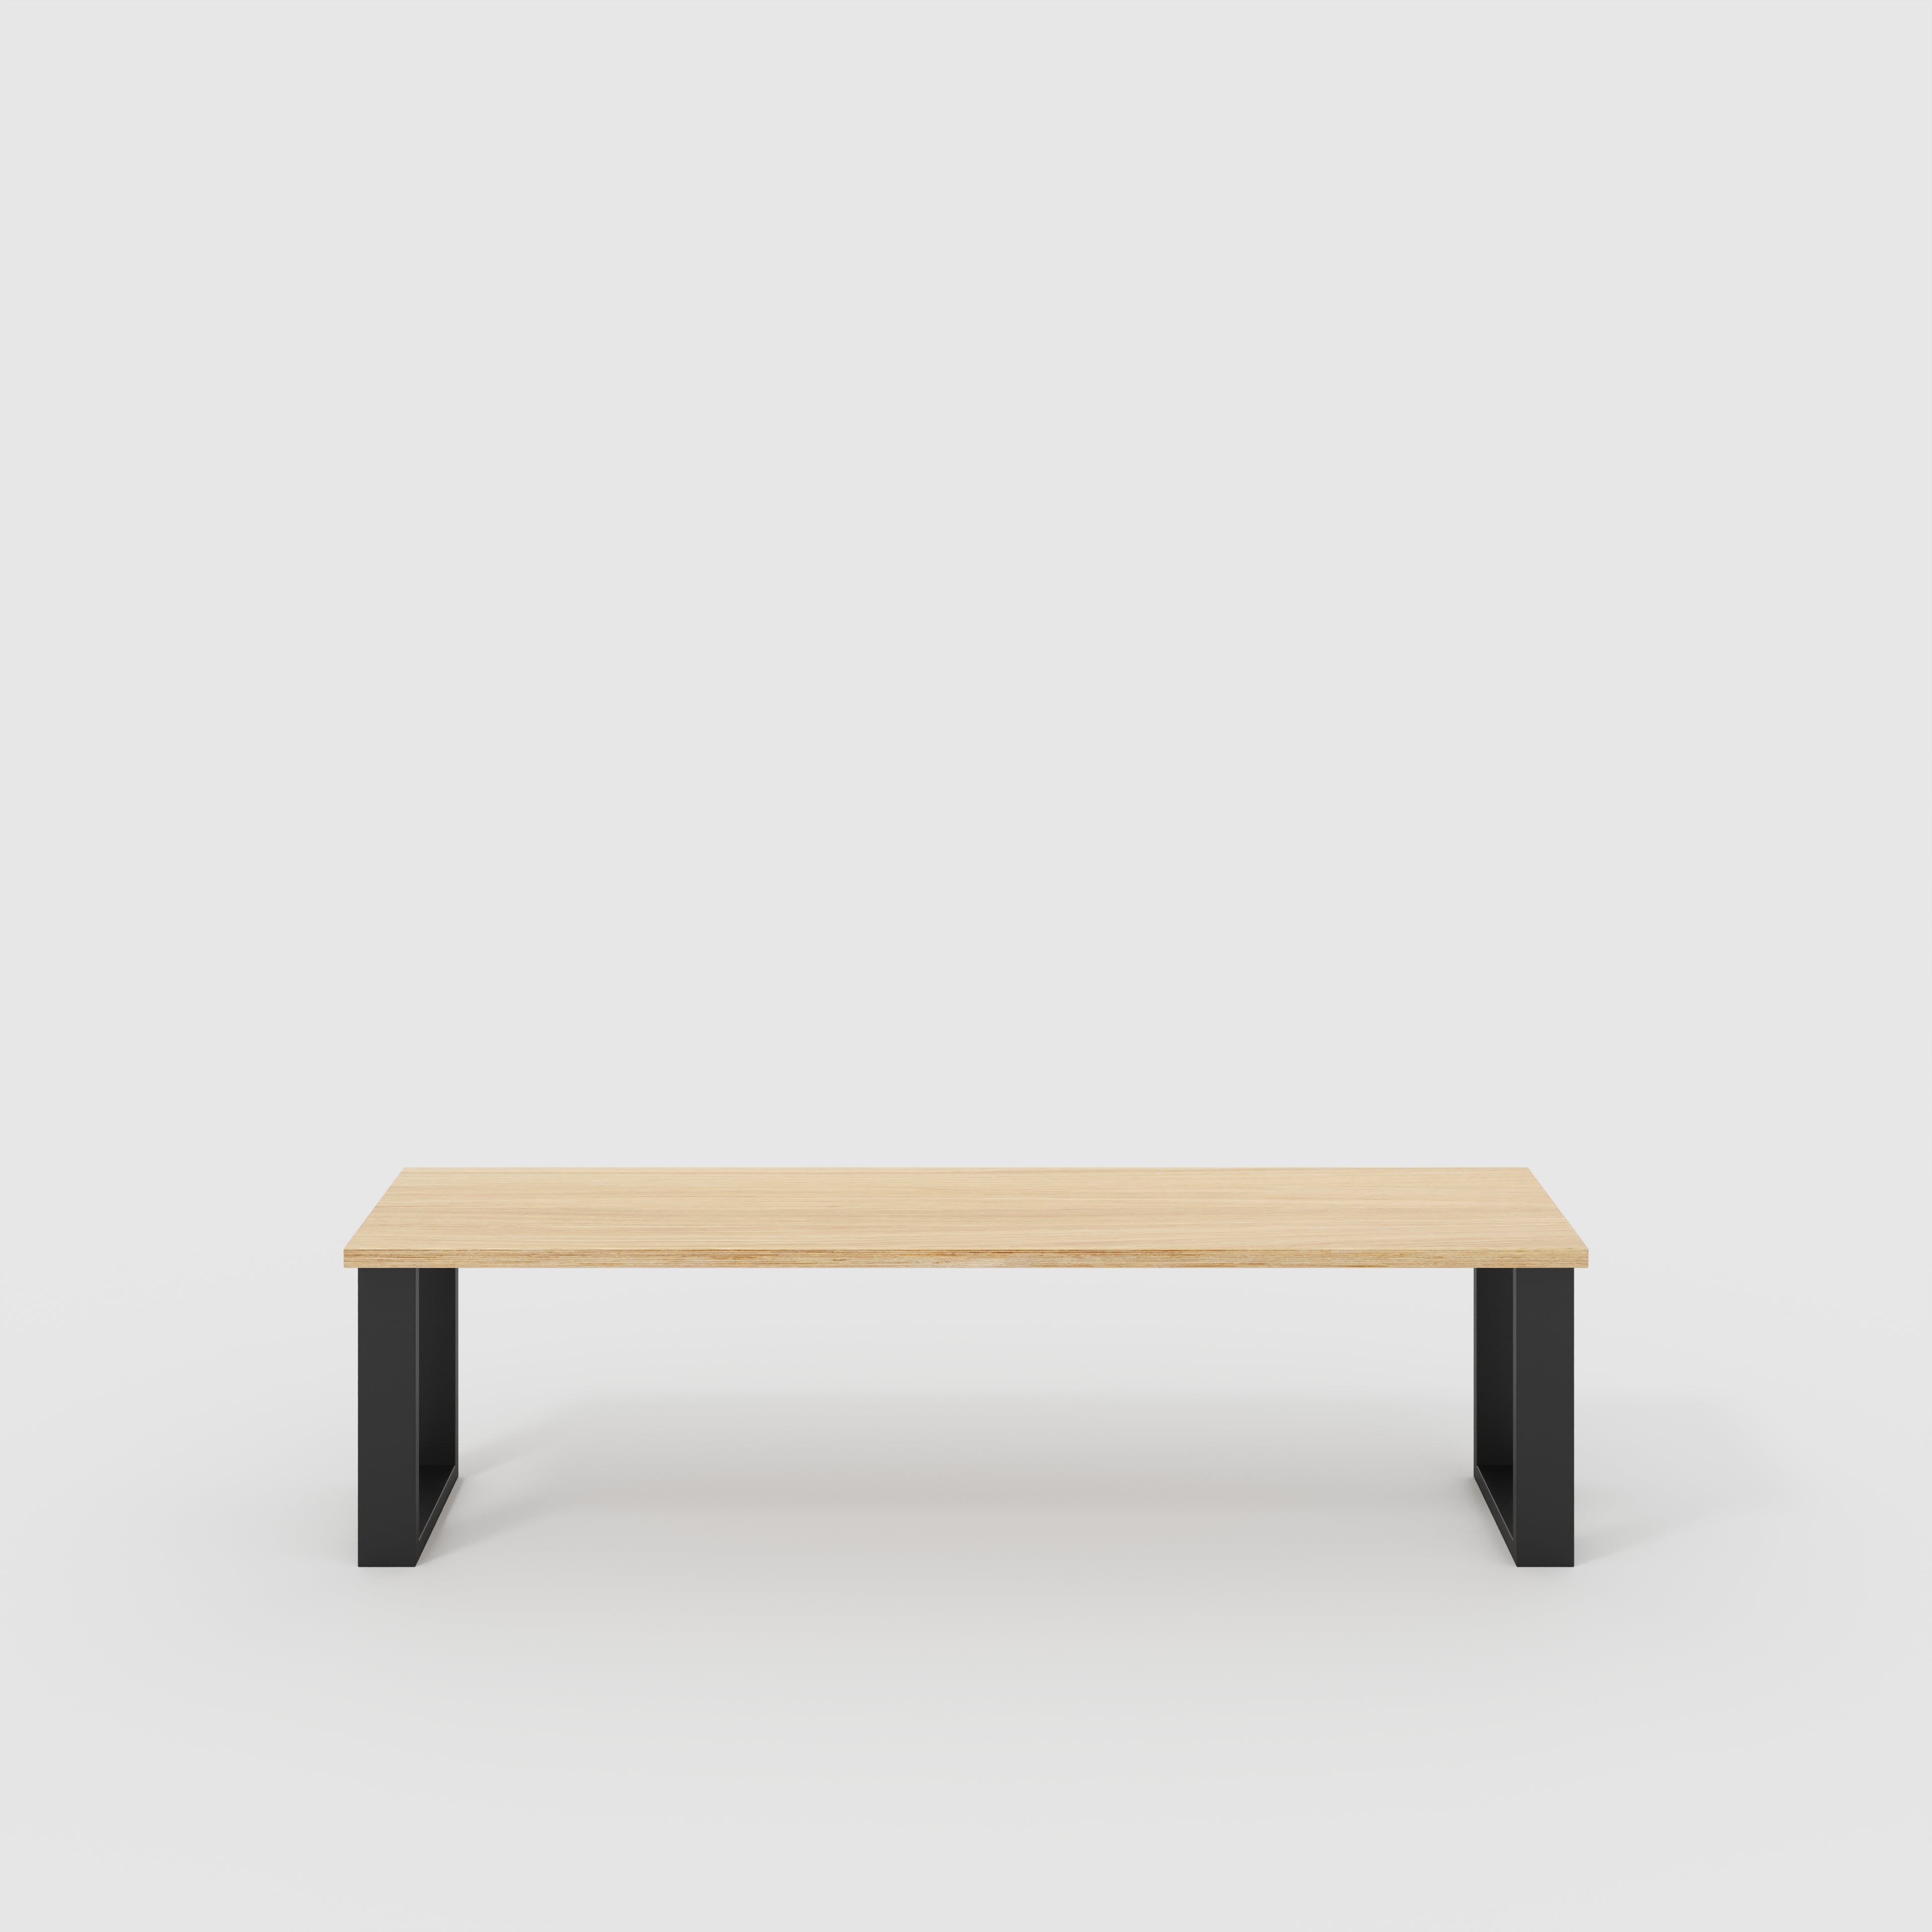 Bench Seat with Black Industrial Legs - Plywood Oak - 1600(w) x 400(d)